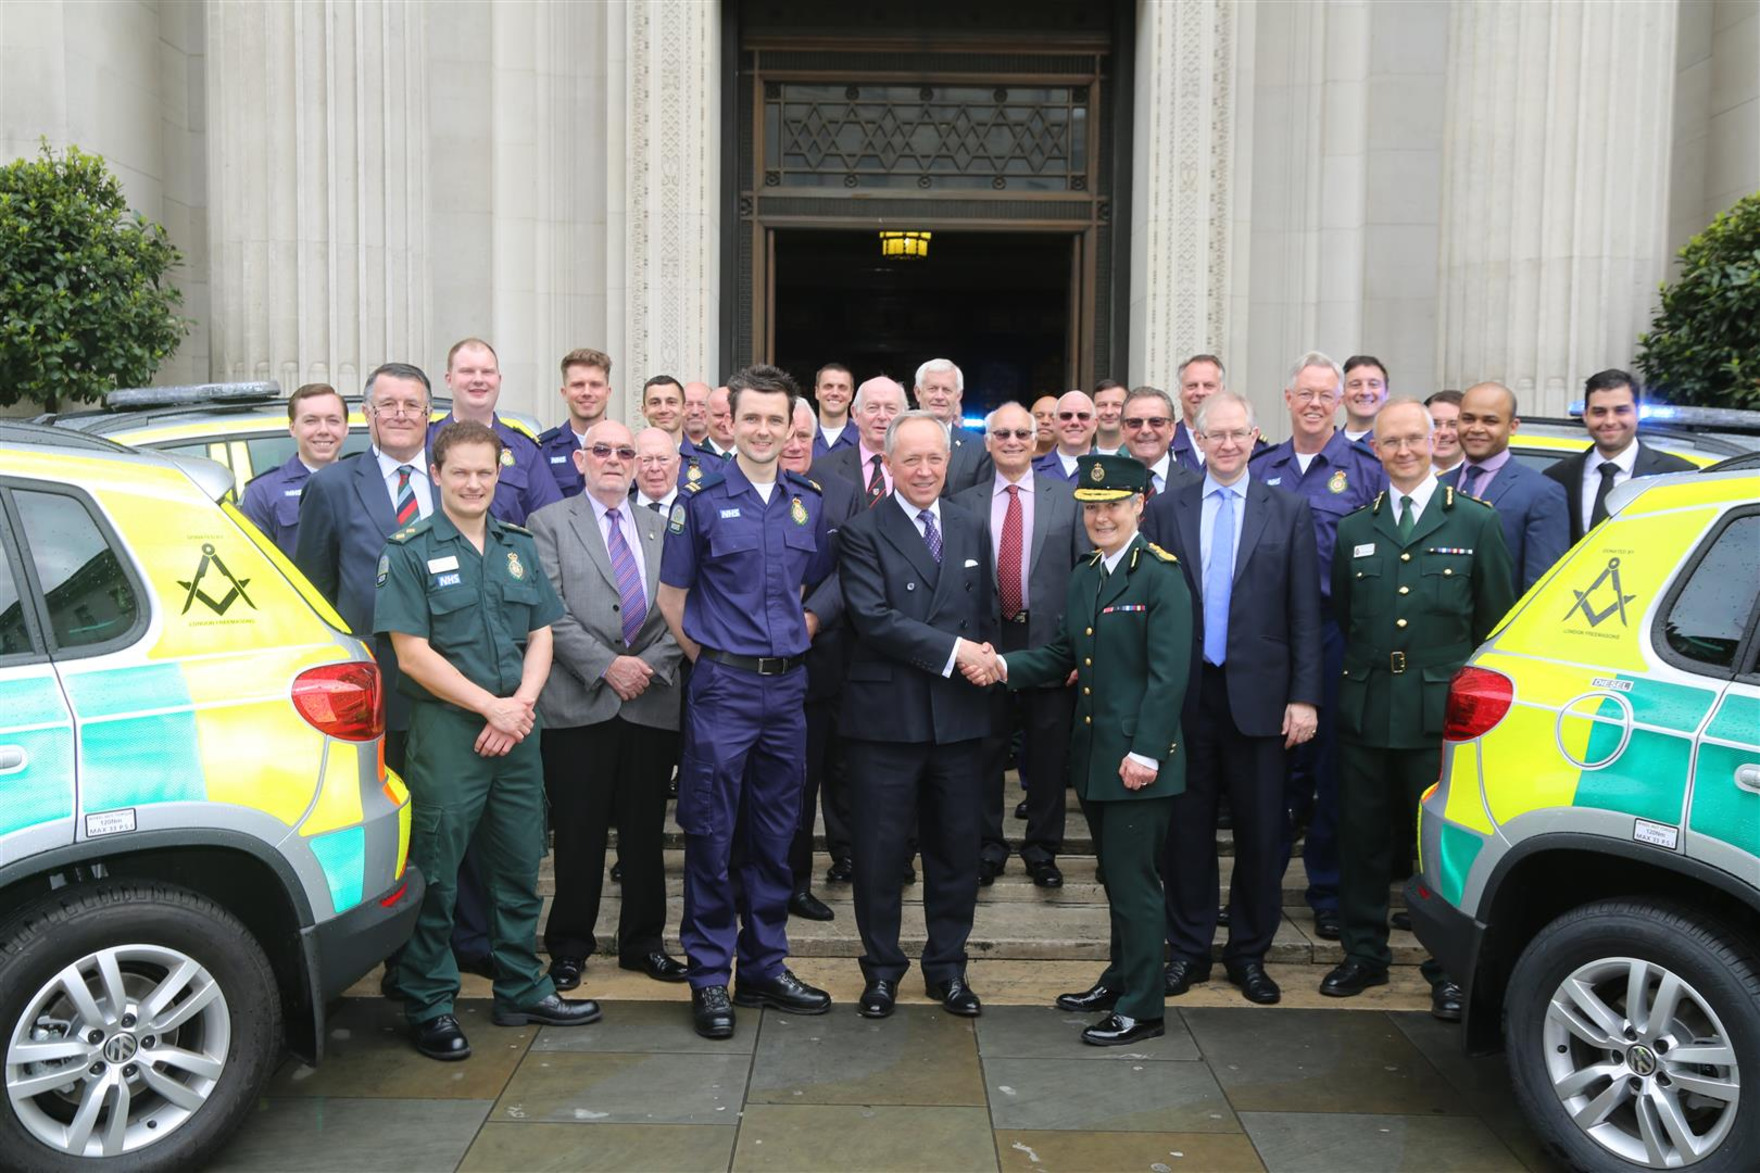 MORE MASONIC SUPPORT FOR THE LONDON EMERGENCY SERVICES